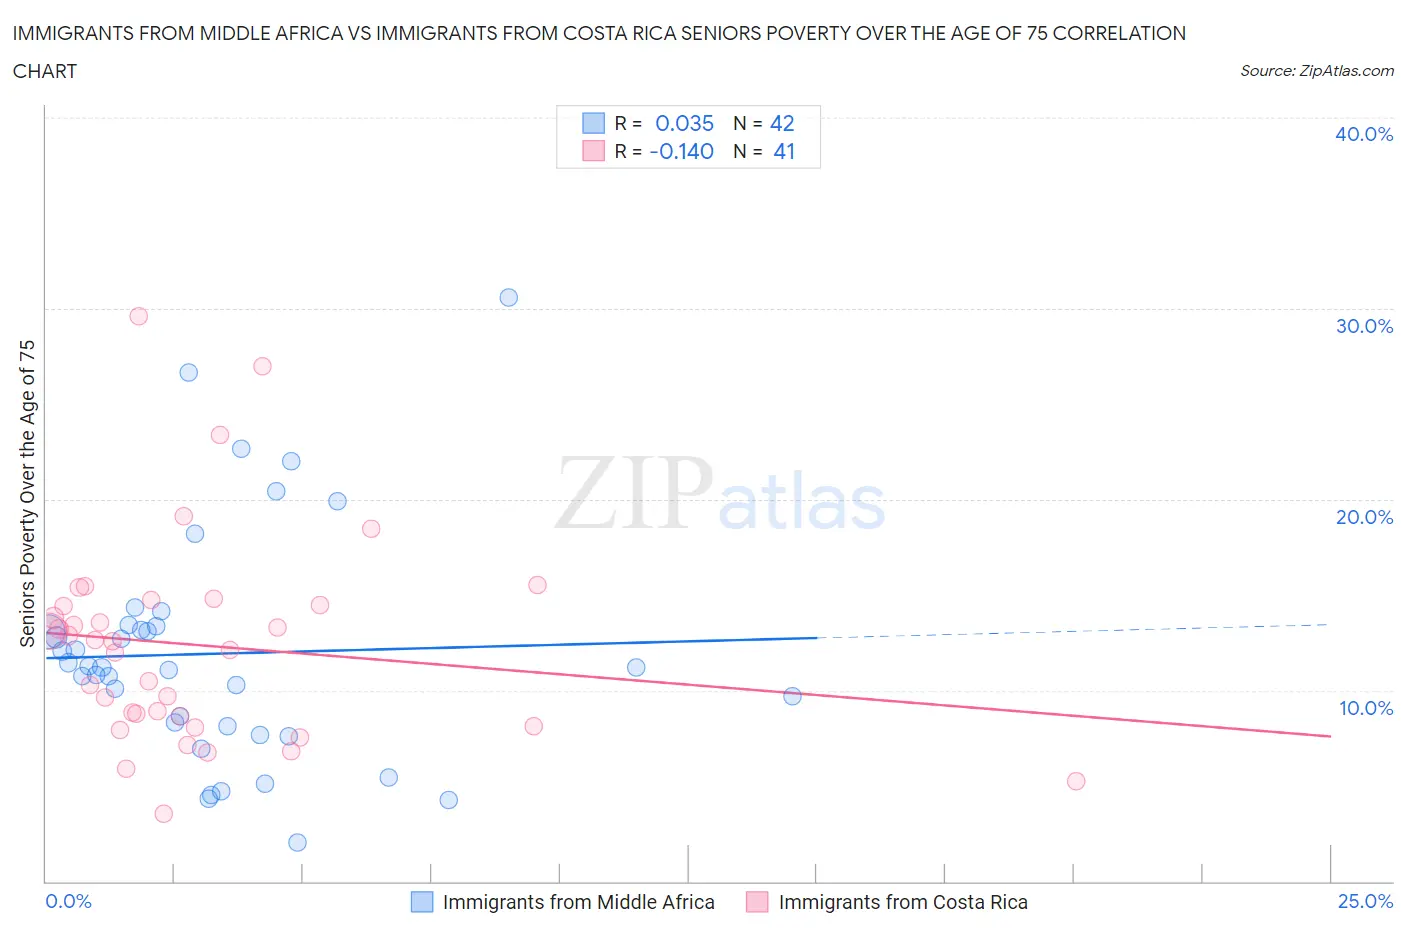 Immigrants from Middle Africa vs Immigrants from Costa Rica Seniors Poverty Over the Age of 75